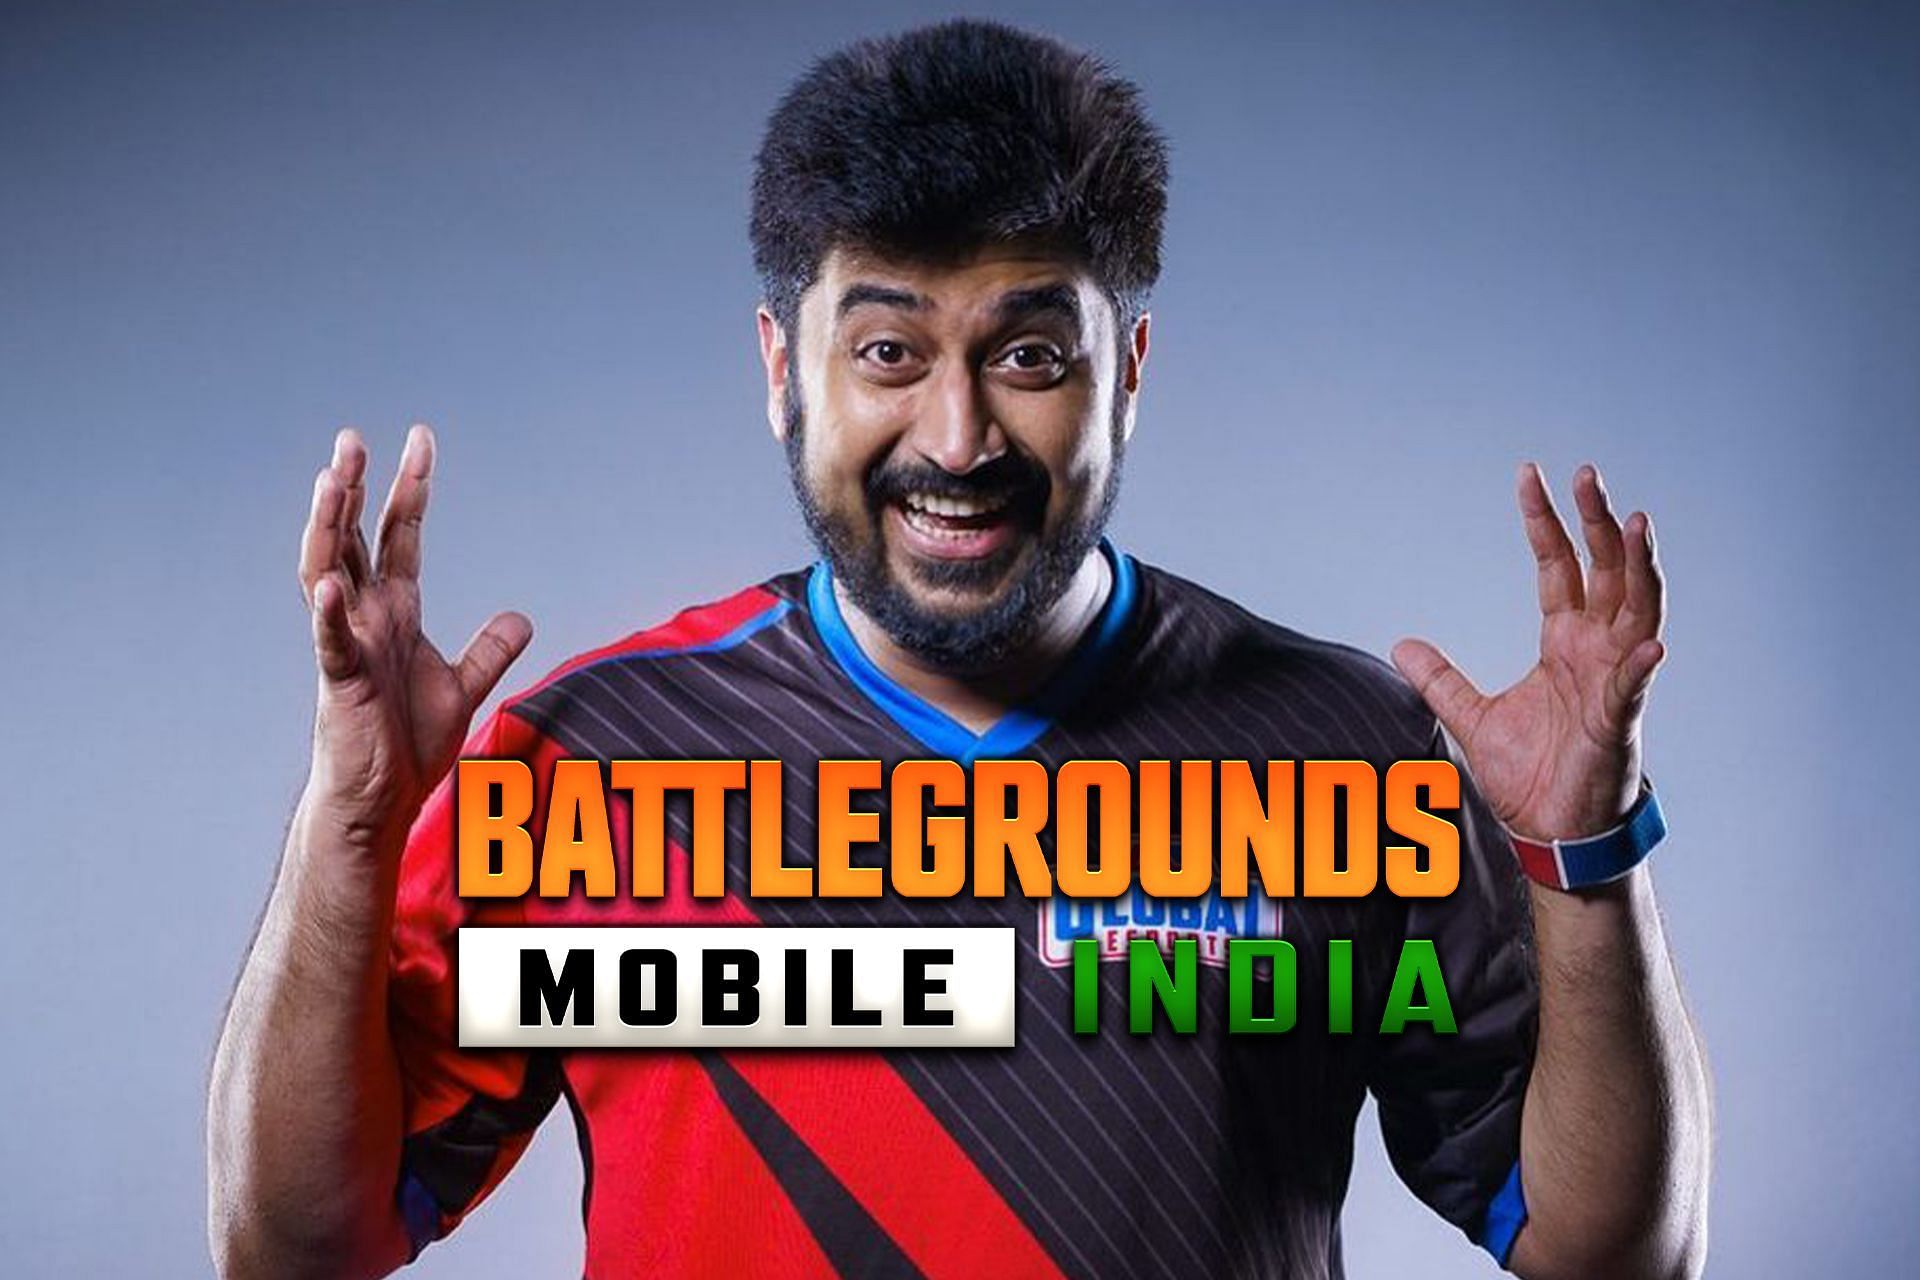 Battlegrounds Mobile India is expected to make a comeback very soon (Image via Sportskeeda)